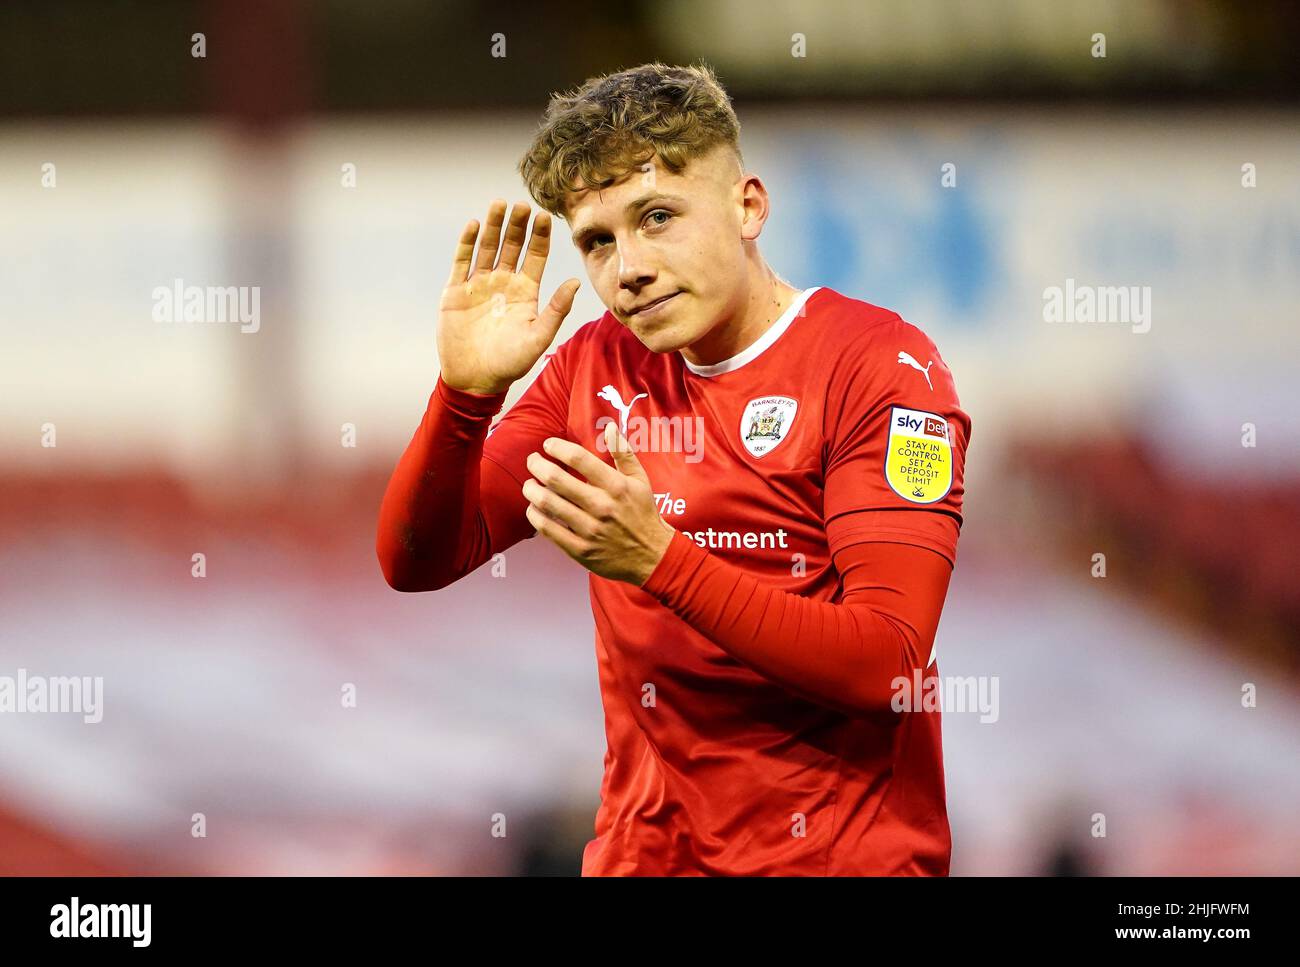 Barnsley Football Club - 💬, We caught up with your newly-crowned Academy  Player of the Year for 2018/19, Aiden Marsh! INTERVIEW ➡️ bit.ly/MarshIntvw  #NotJustAGame, #YouReds